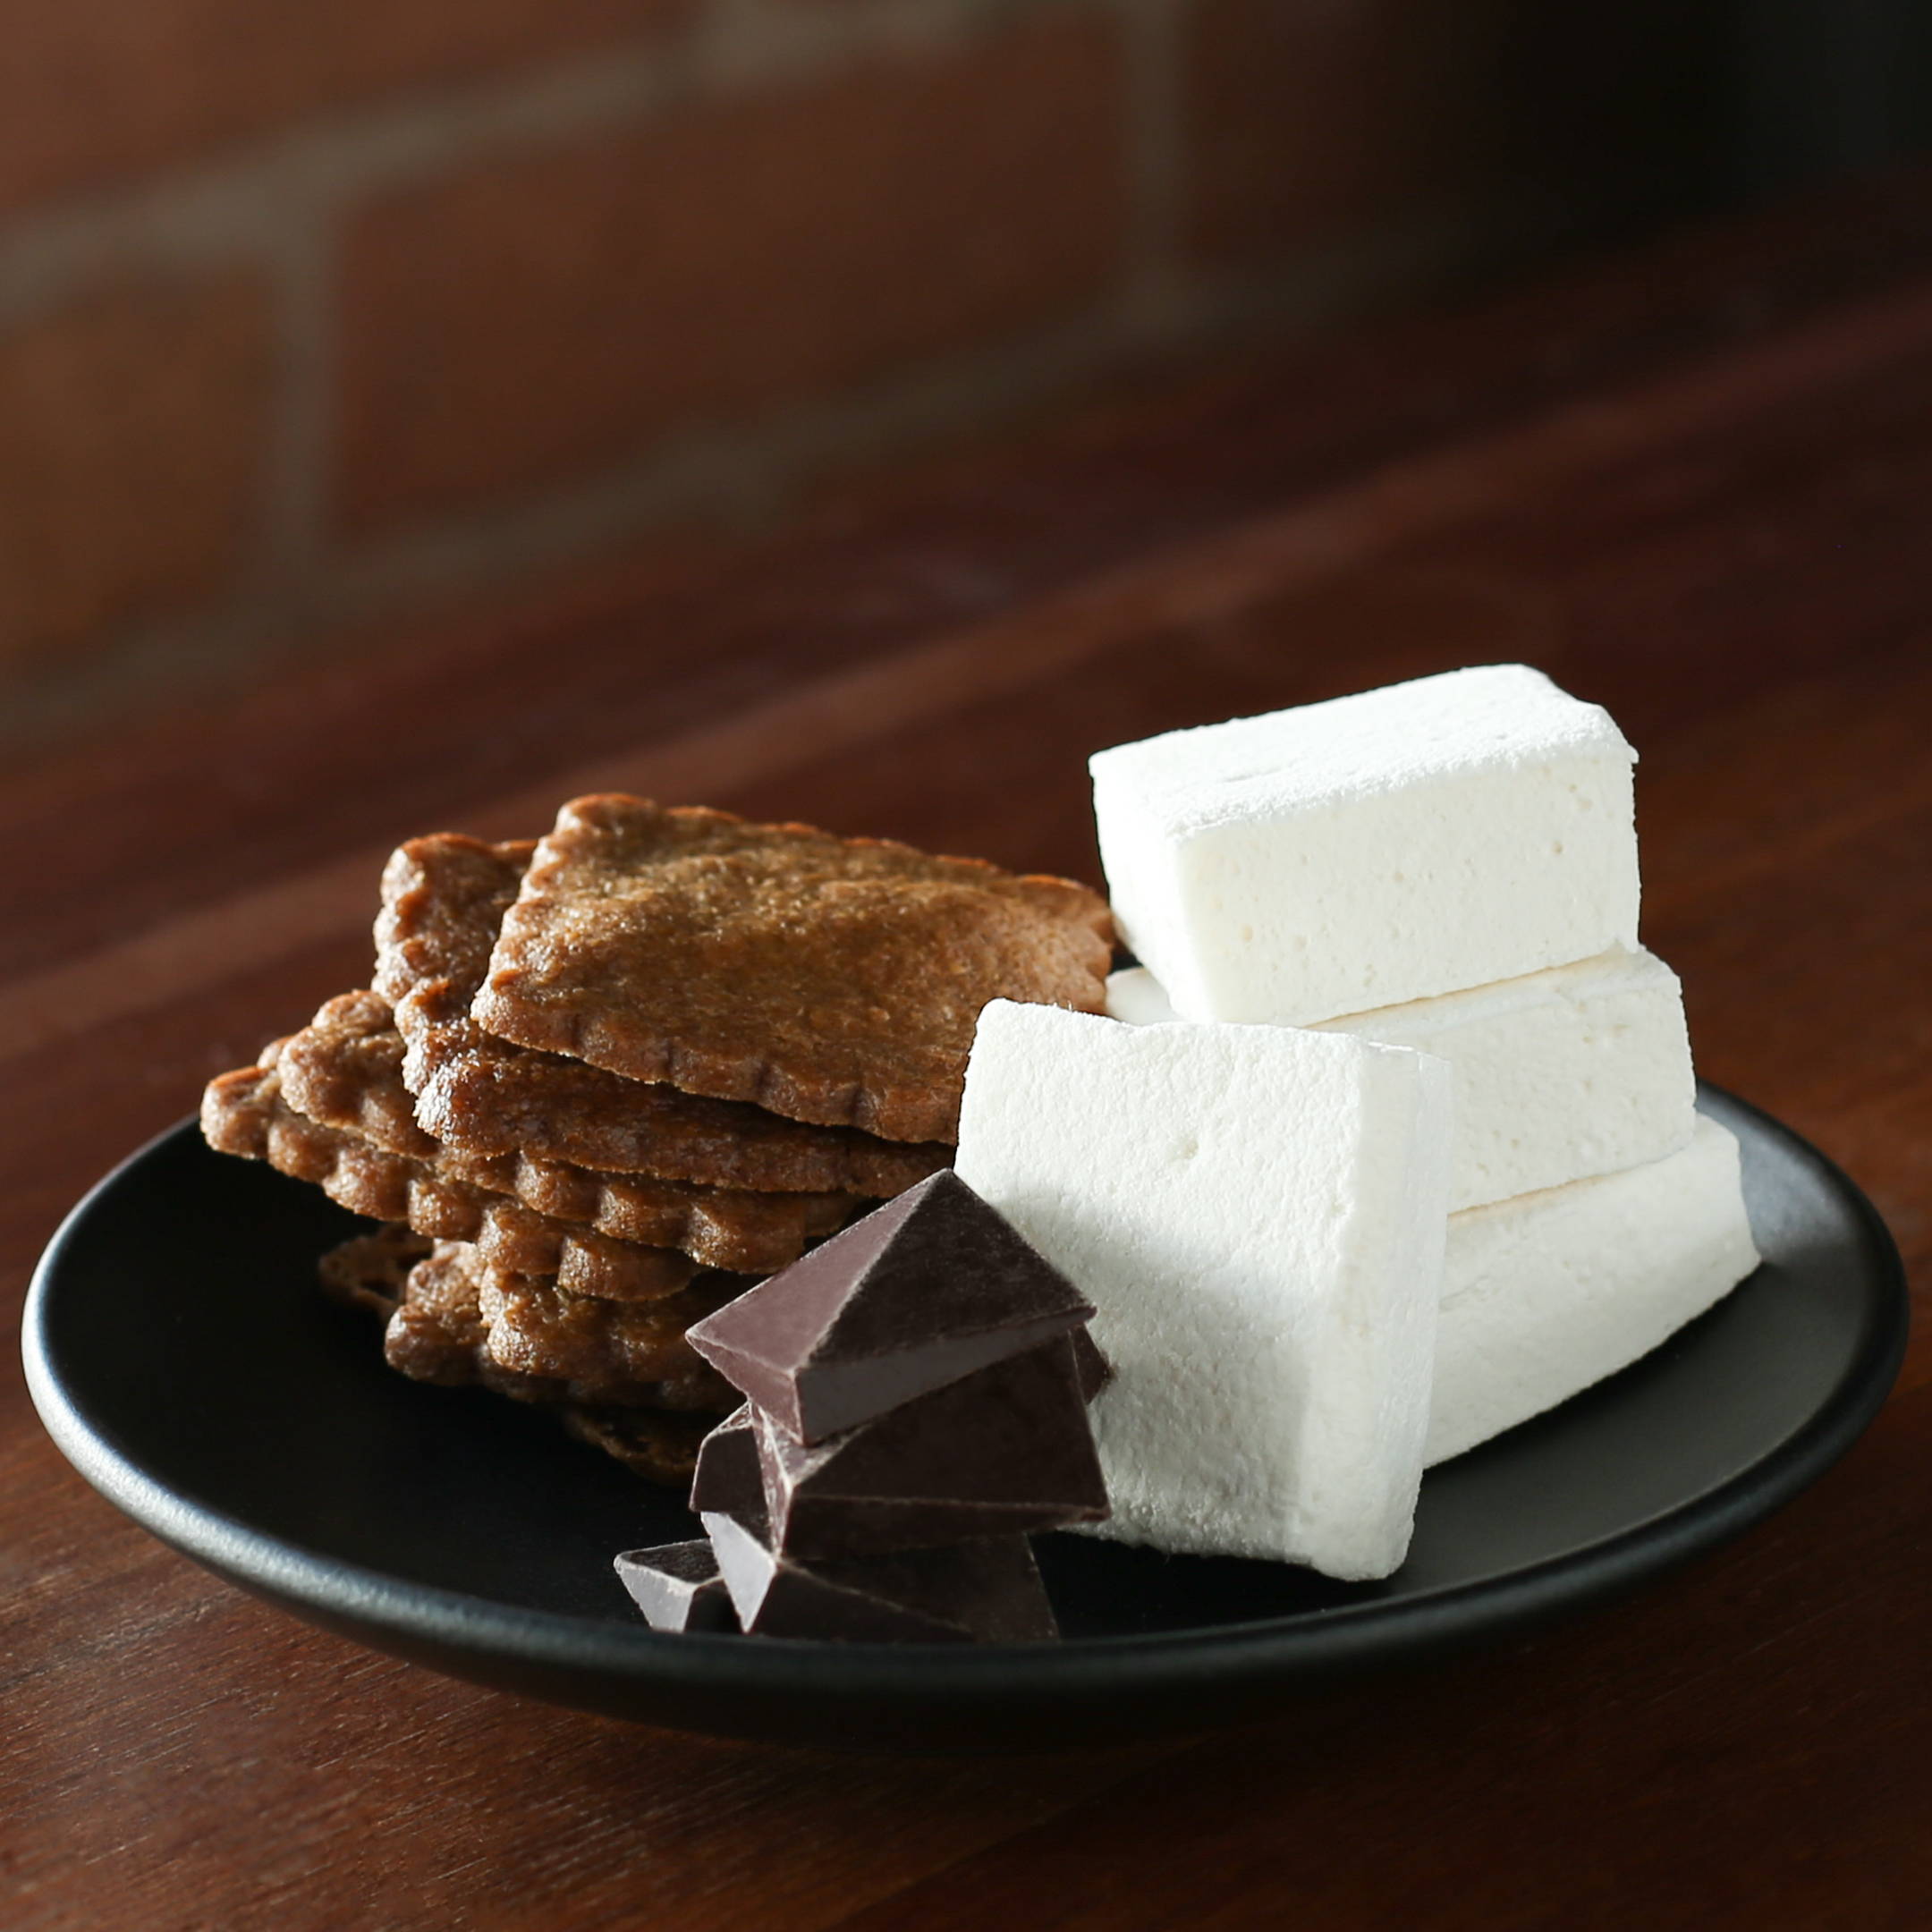 S'mores ingredients on plate